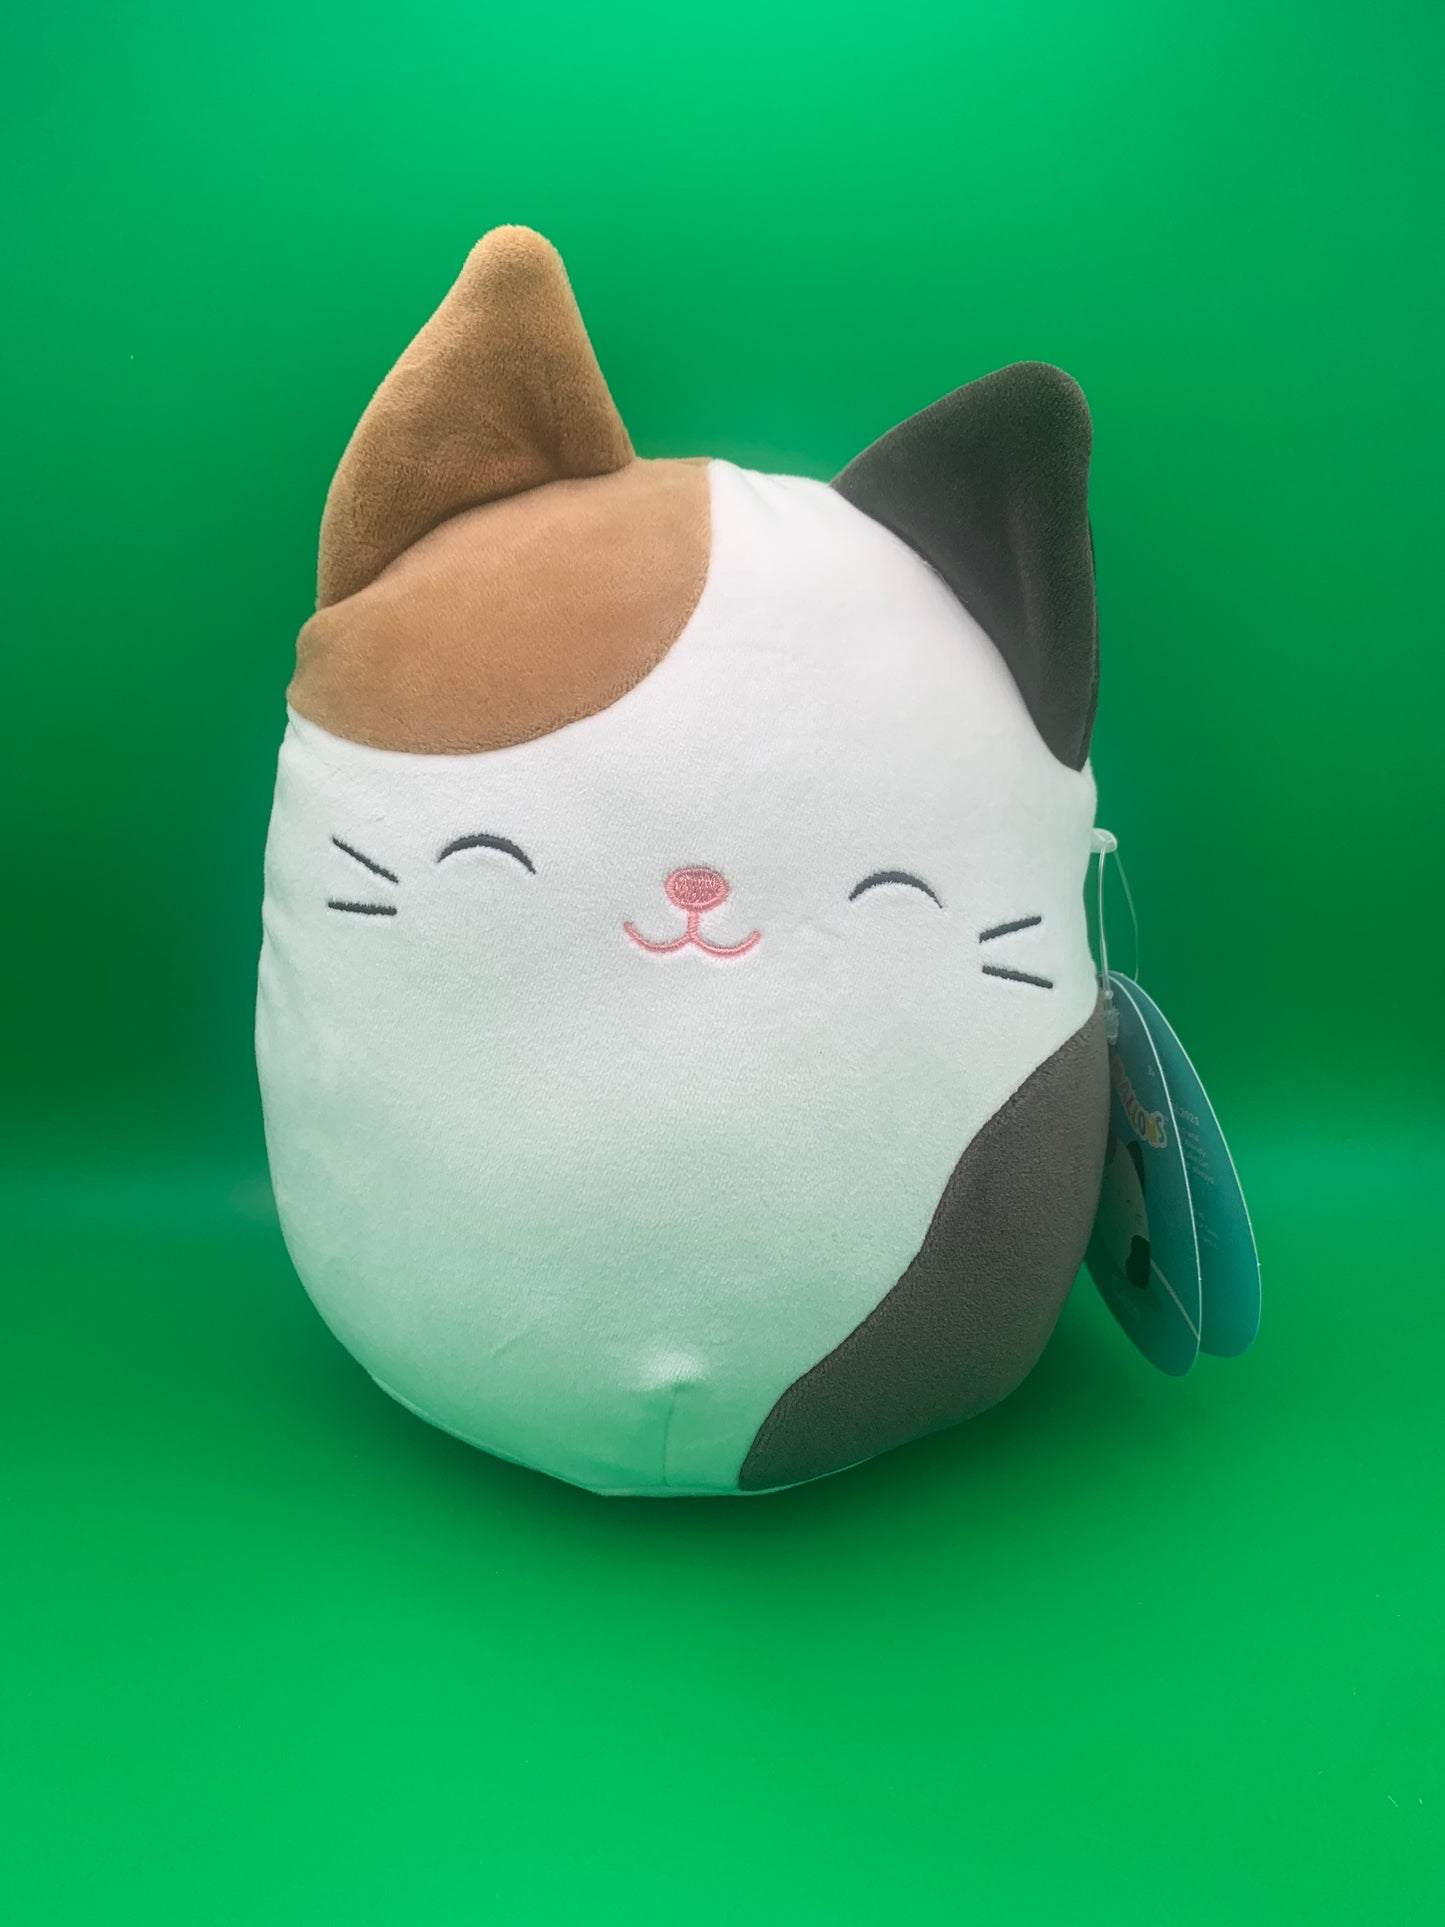 Squishmallow Cam the Cat 7.5 inch